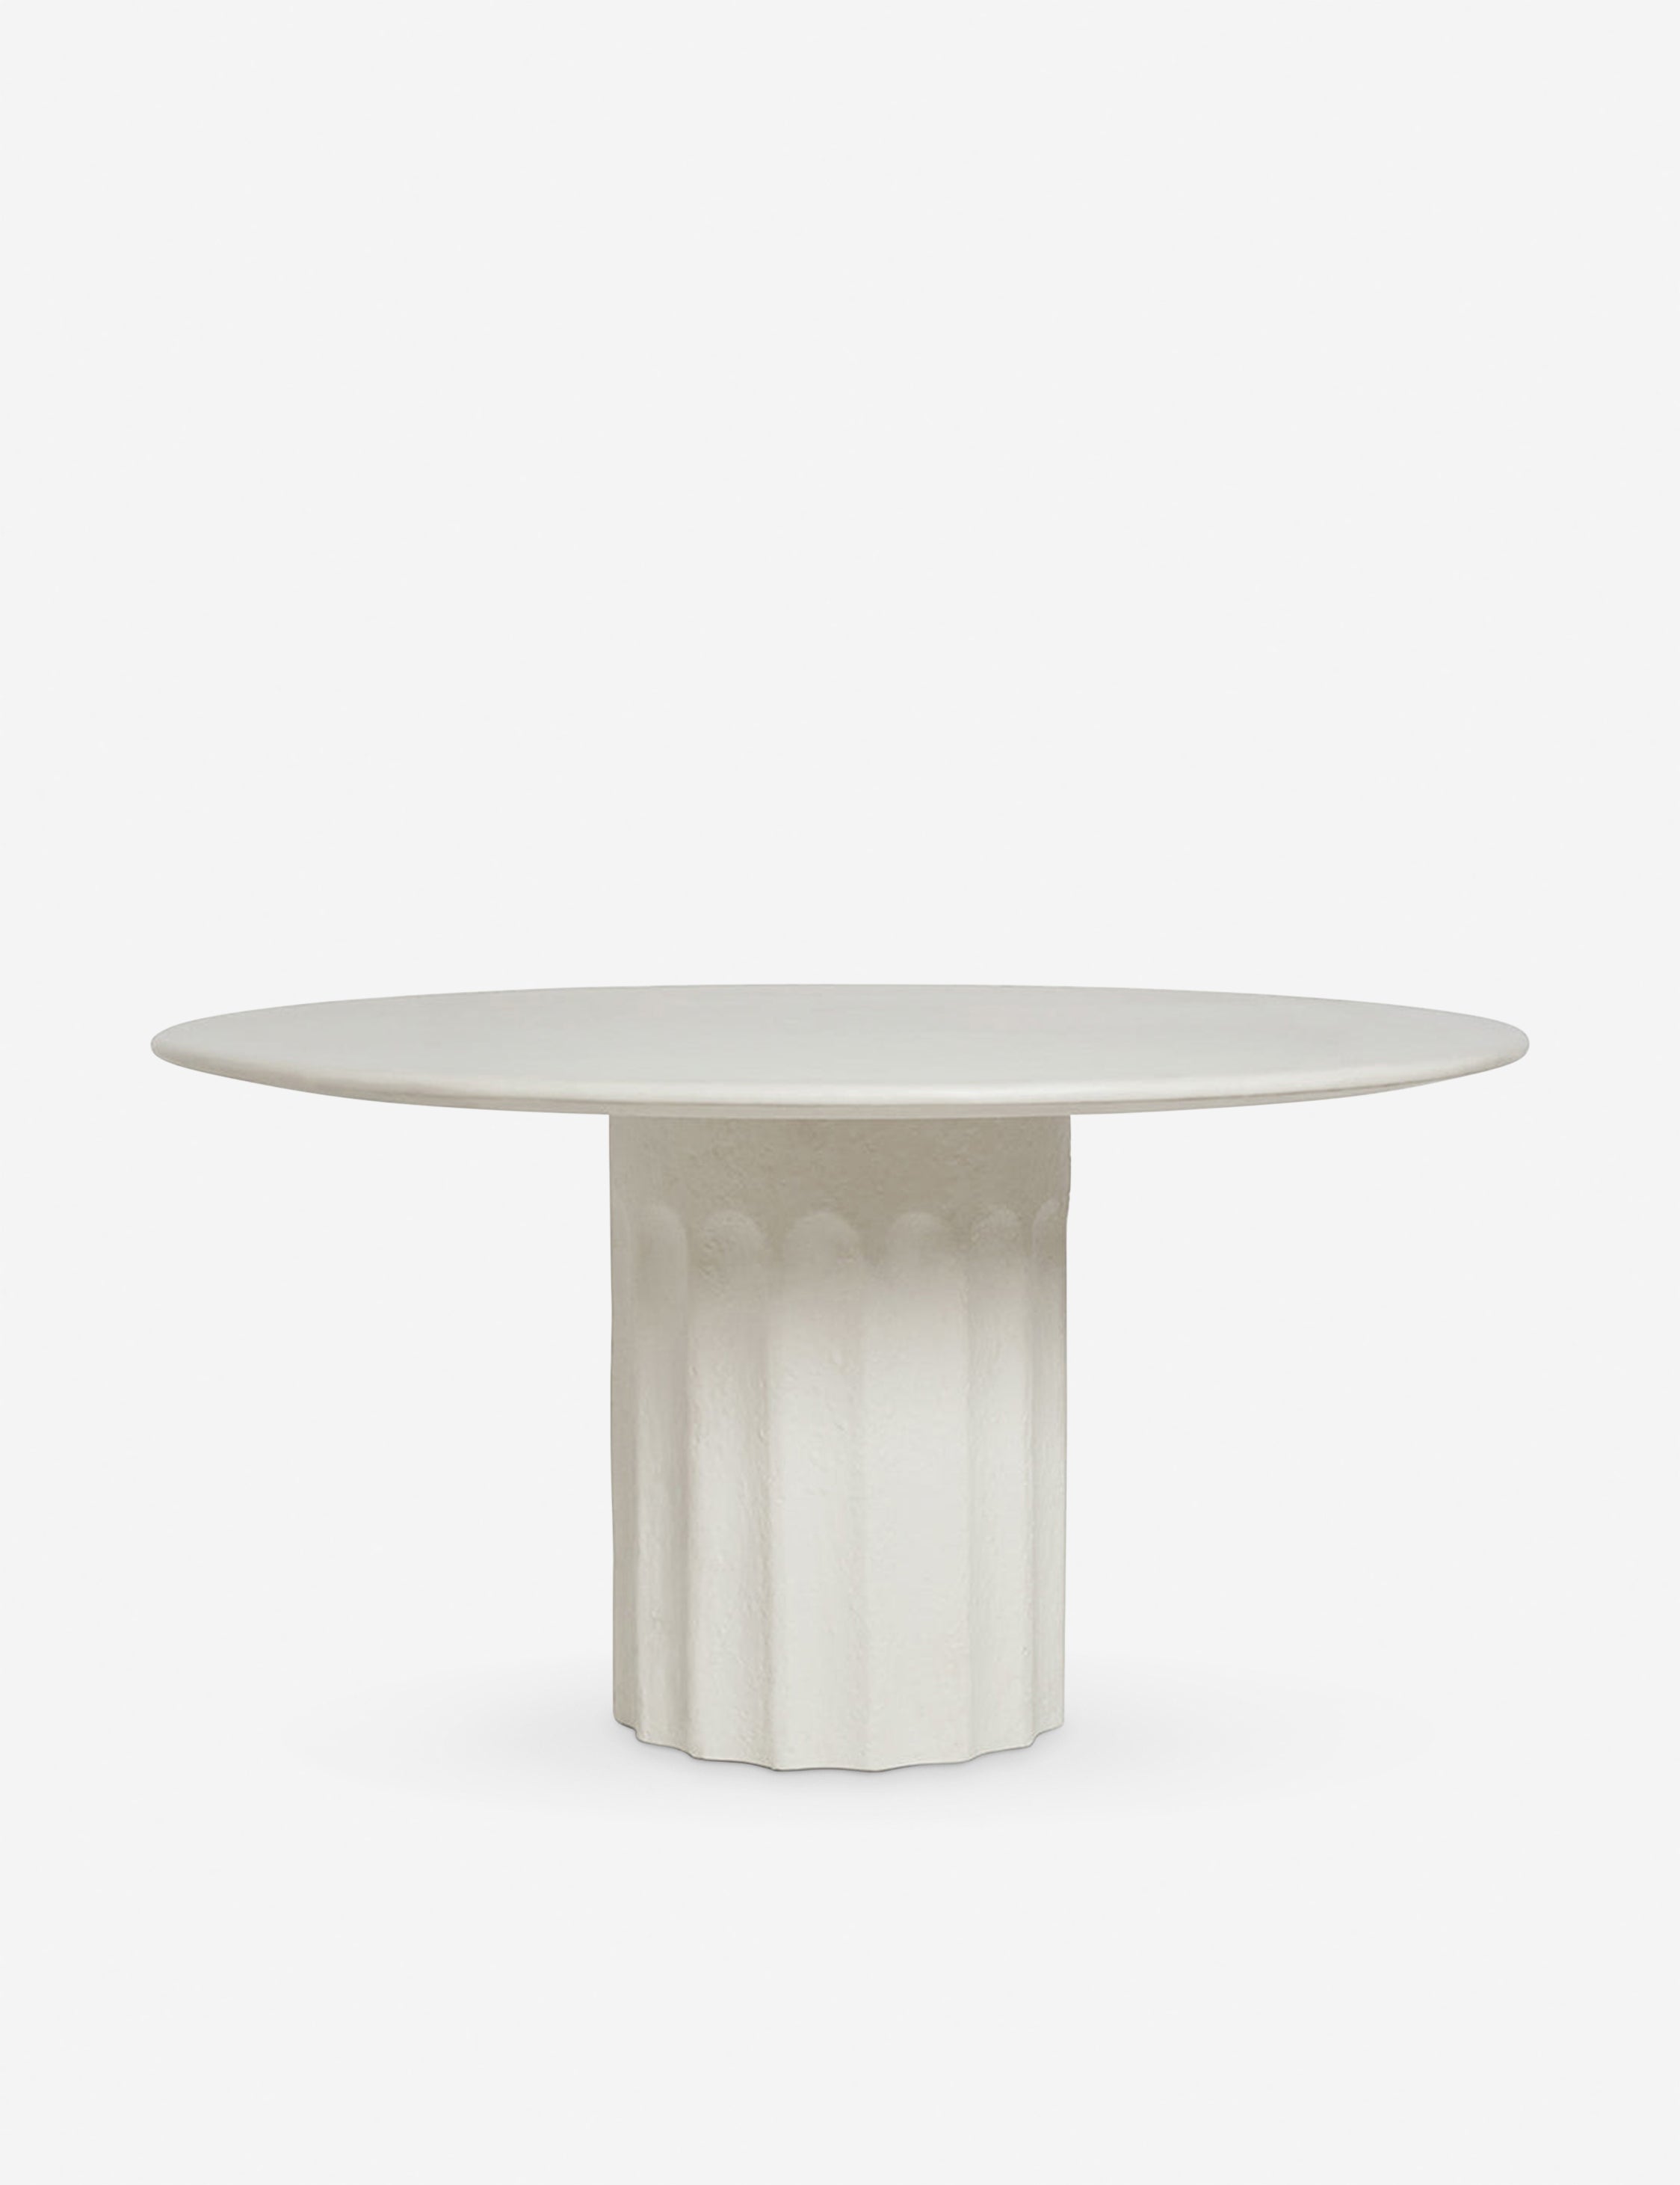 Doric white round fiberstone dining table with a column base by Sarah Sherman Samuel